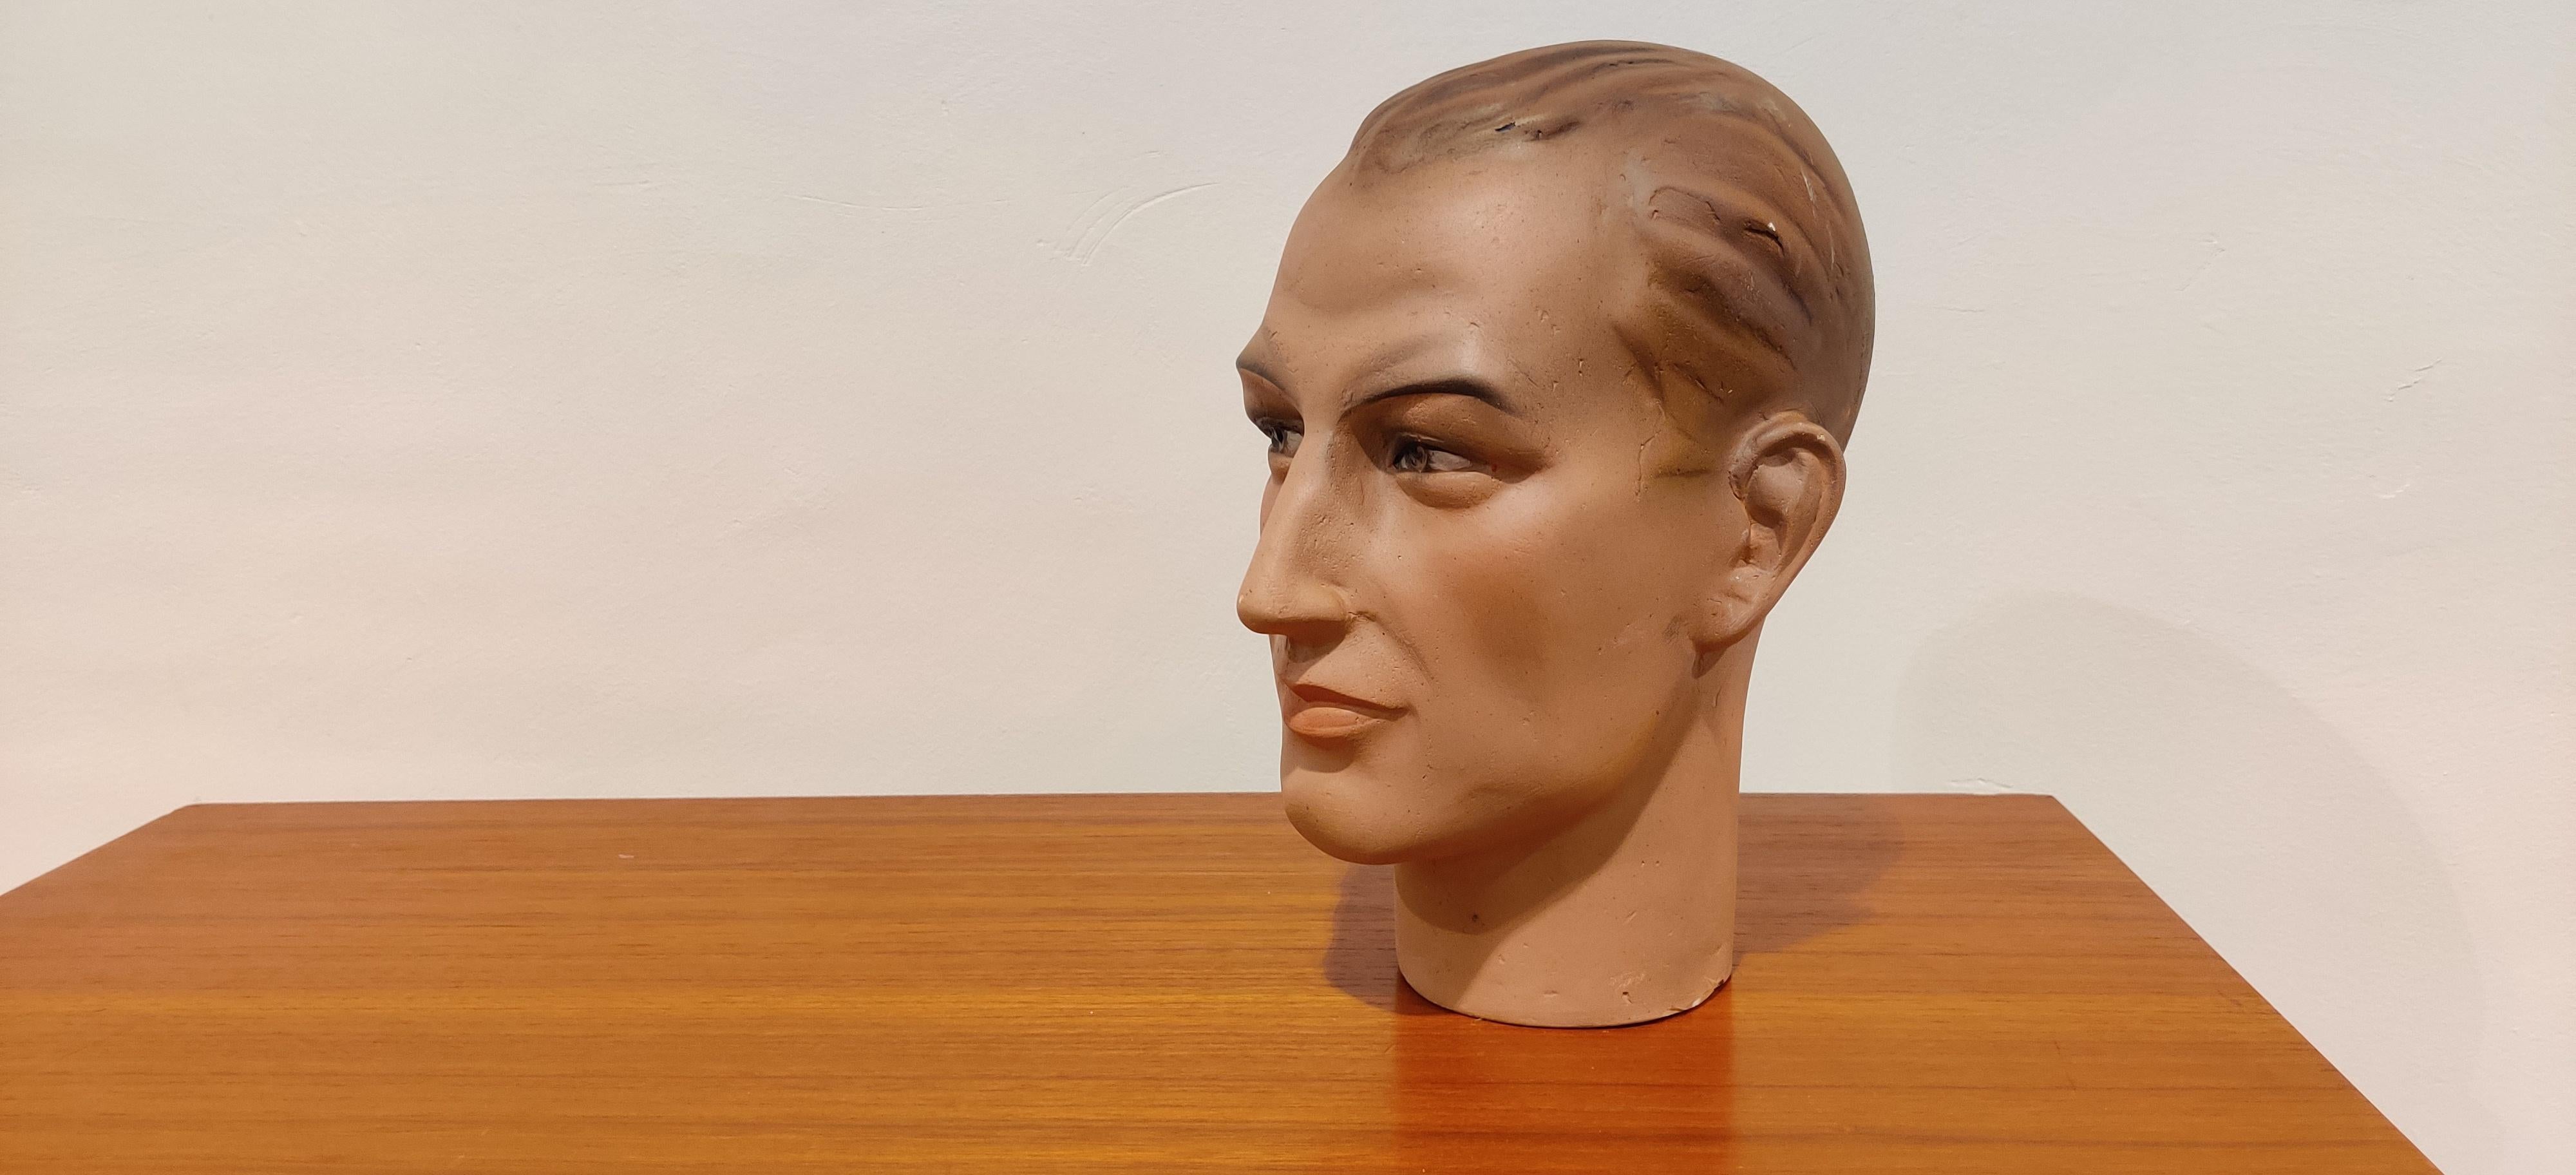 Beautiful funny male mannequin head made from plaster.

It has some minor user traces.

Comes from a lot acquired from a clothes shop that stopped activities.

Great decorative item to display glasses, hats,

France, 1960s

Measures: